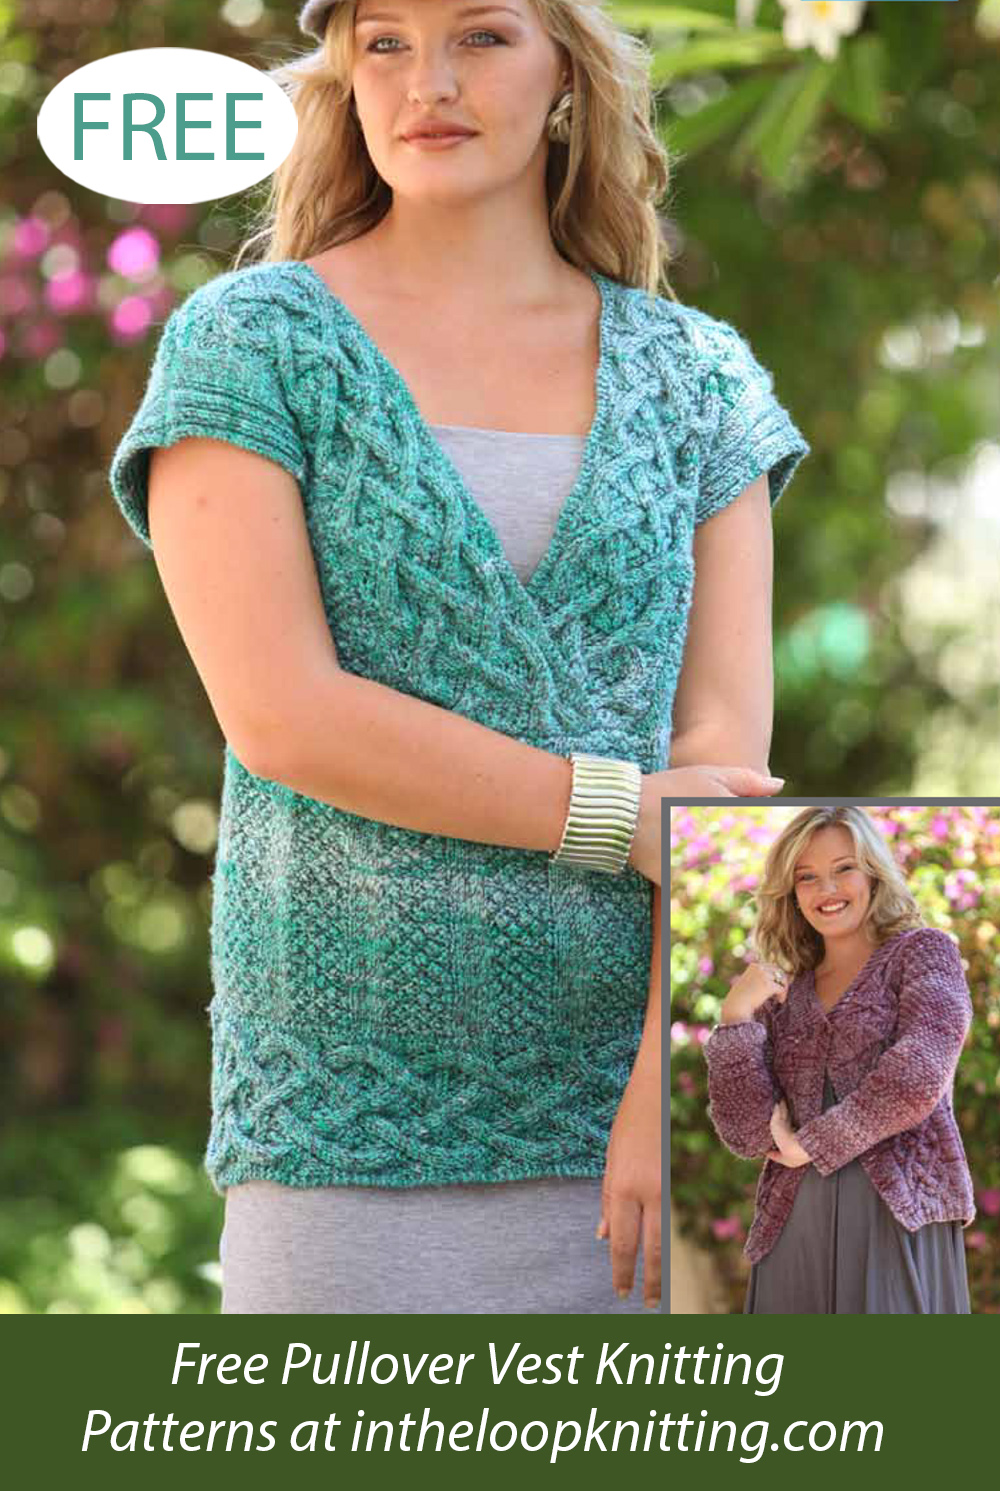 Crabapple Vest Knitting Pattern Download, Cardigans & Jackets,  Collections, Knitting, Patterns